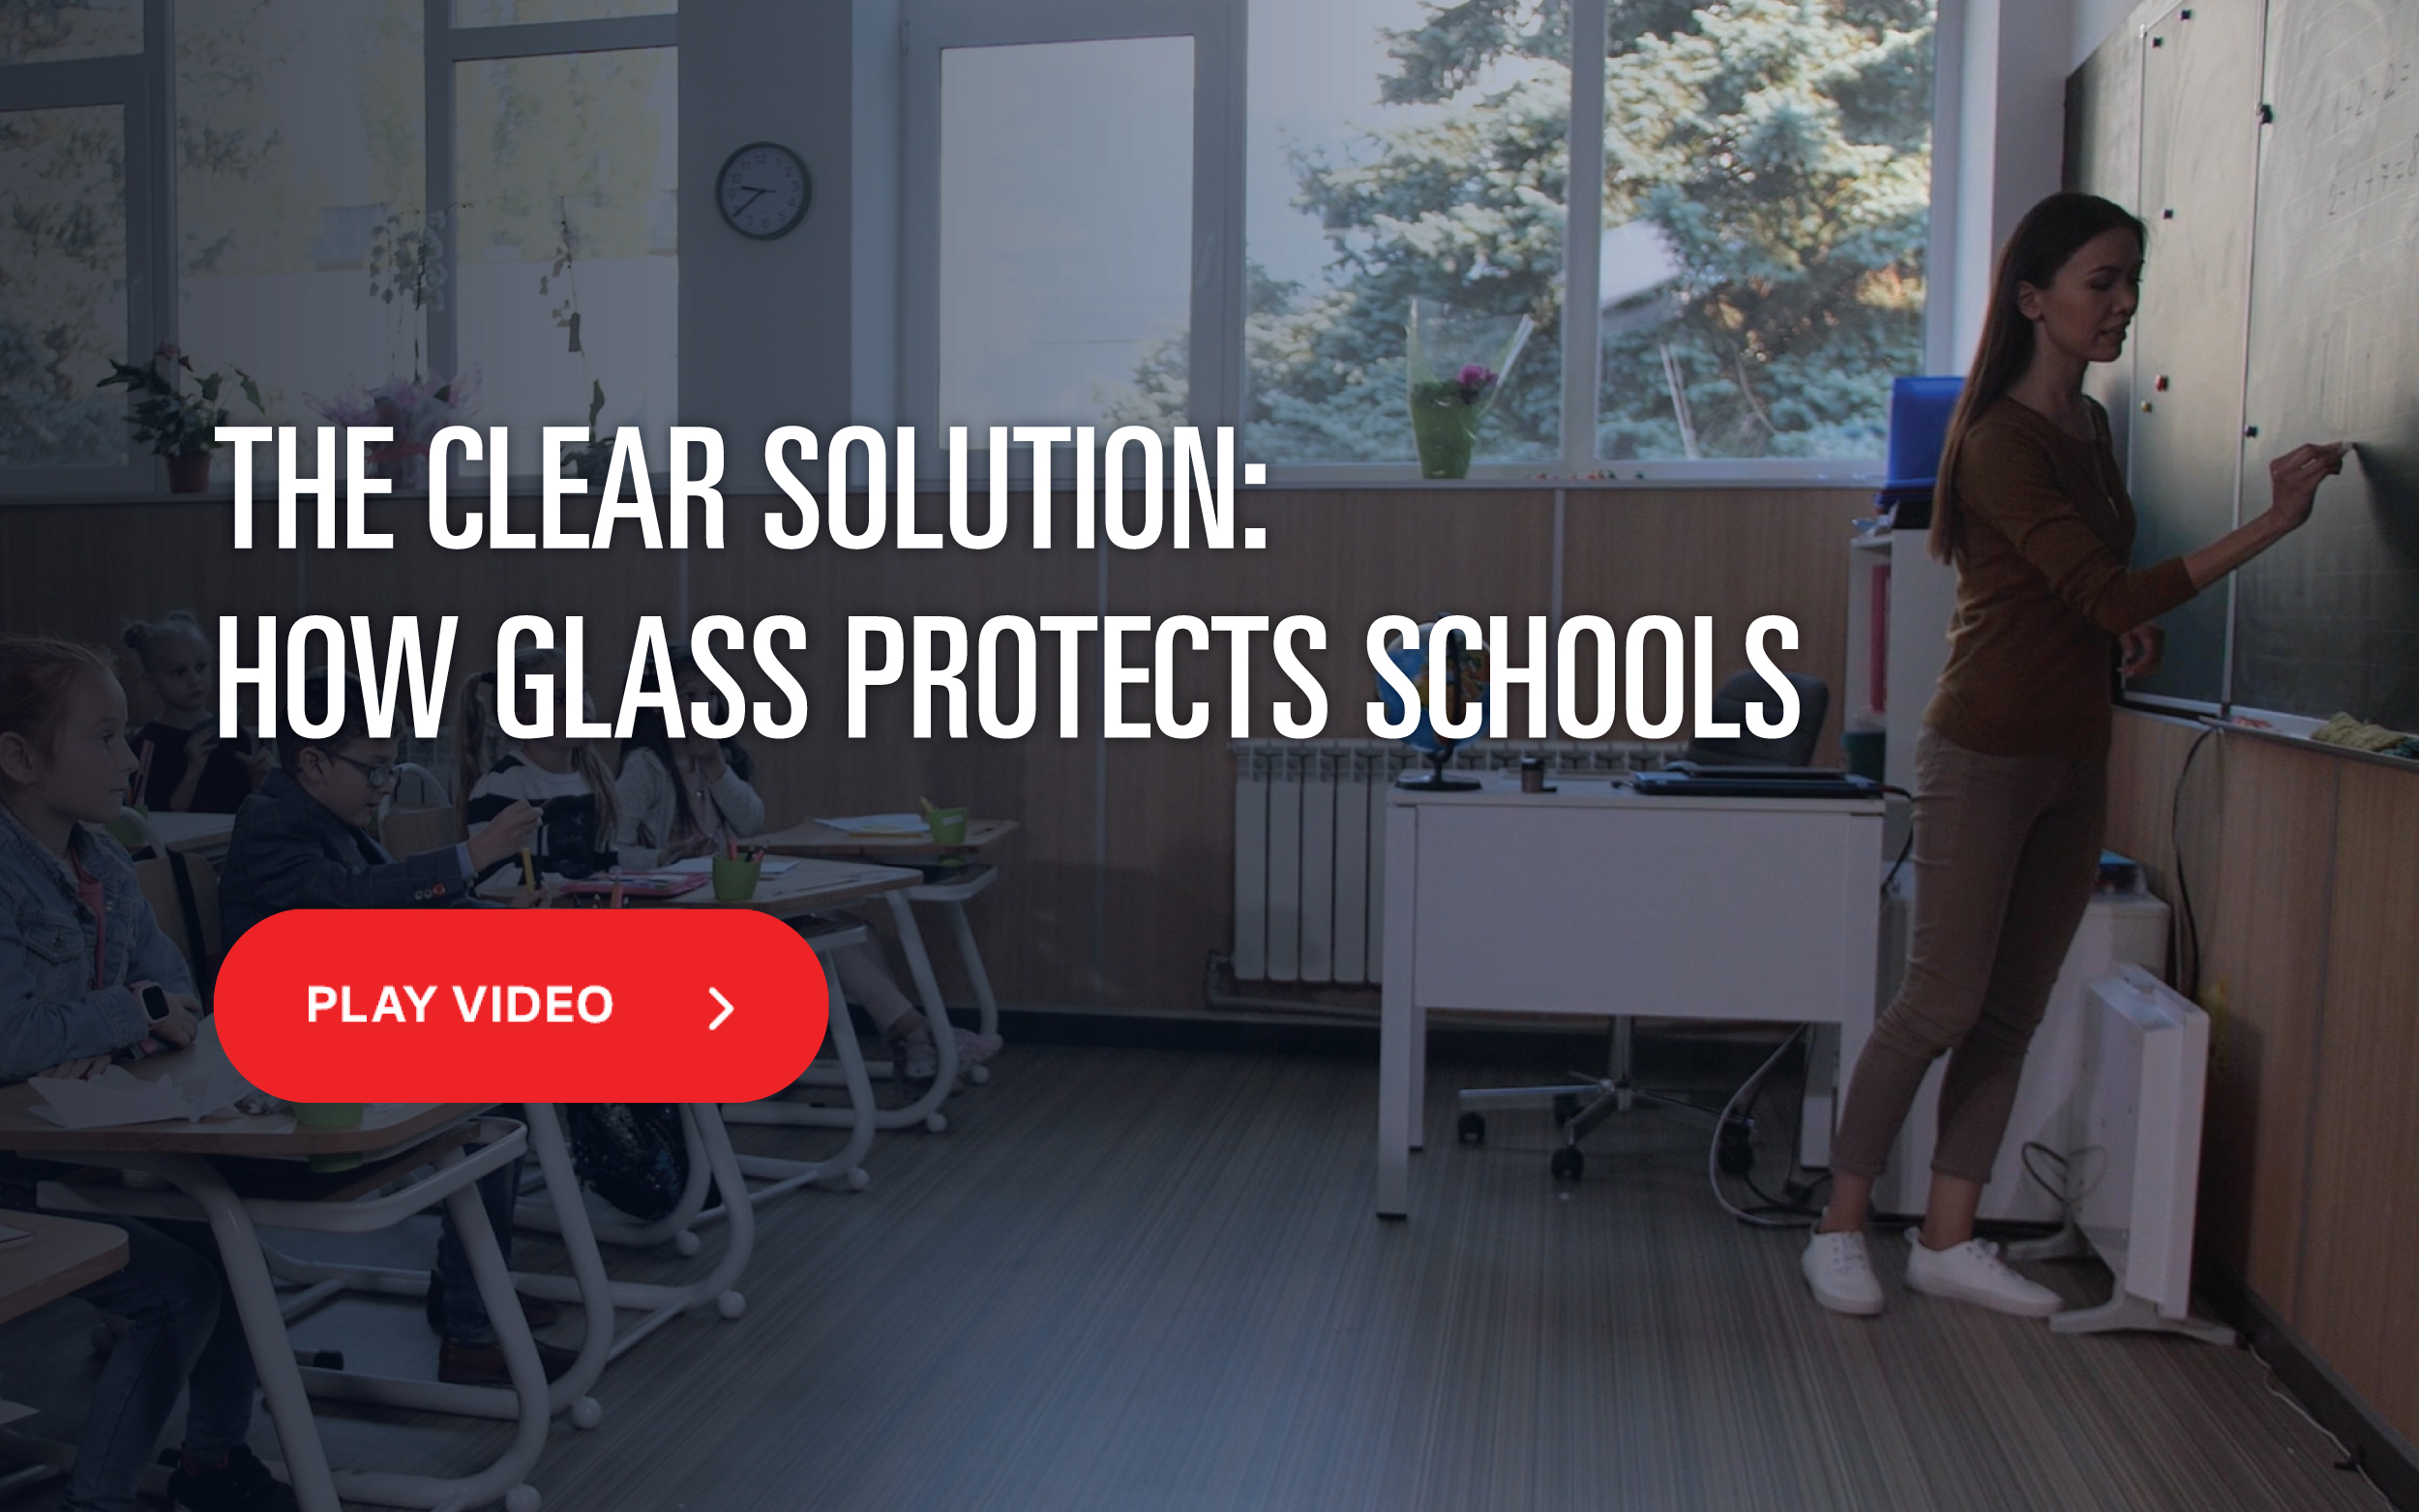 The Clear Solution: How Glass Protects Schools